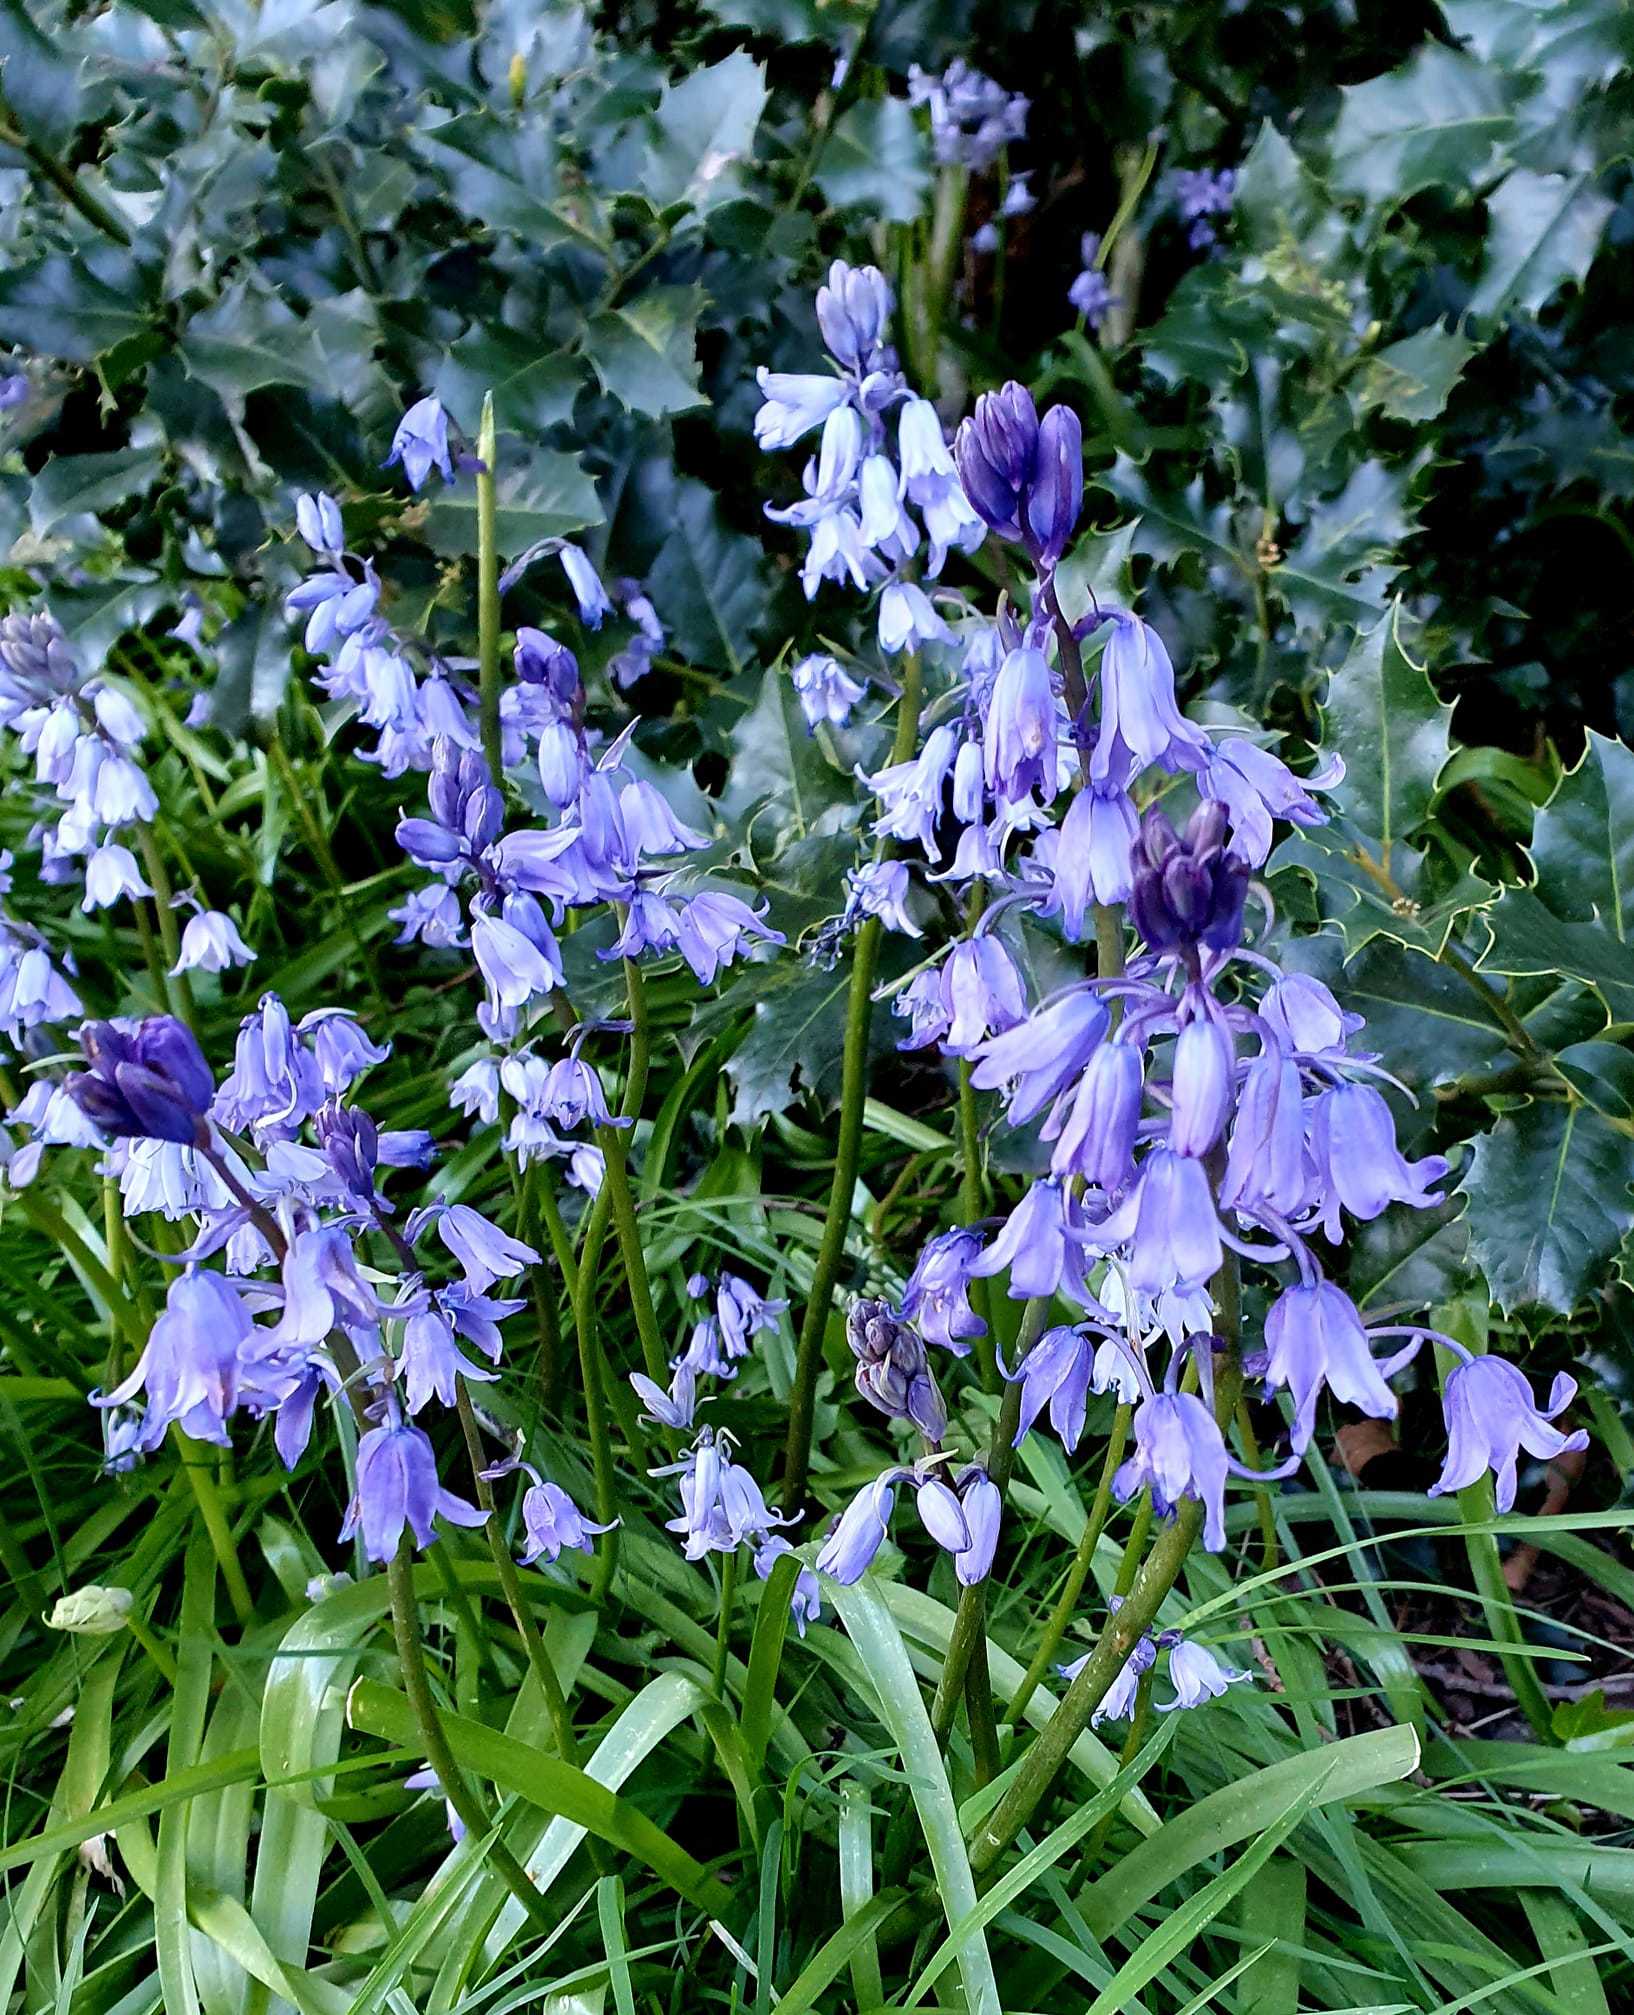 Gorgeous bluebells by Linda Howell